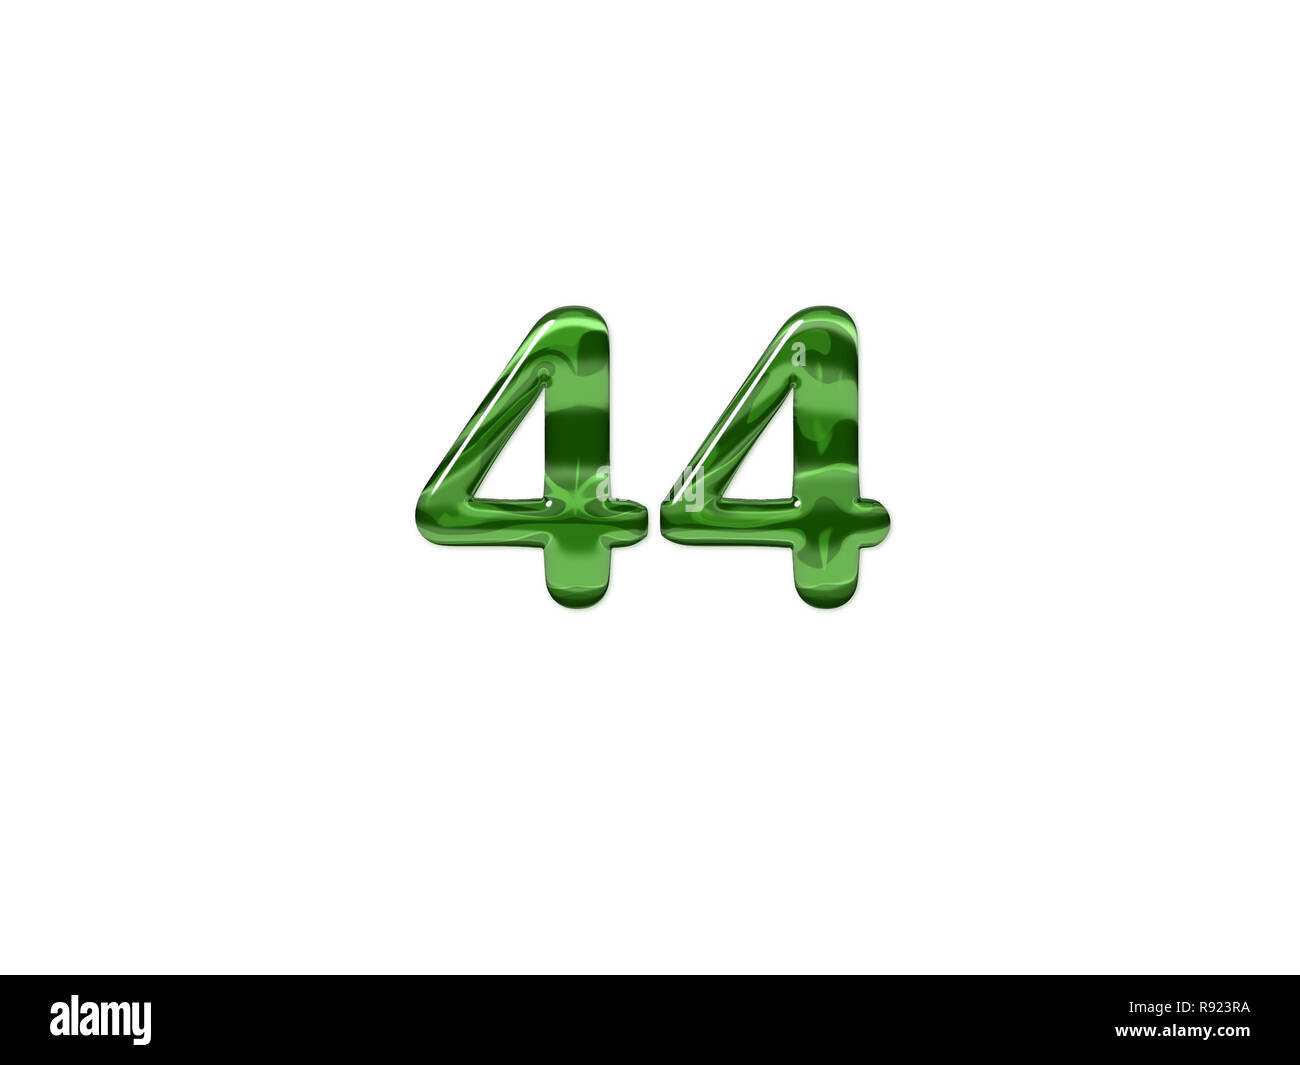 Green Number 44 isolated white background Stock Photo - Alamy